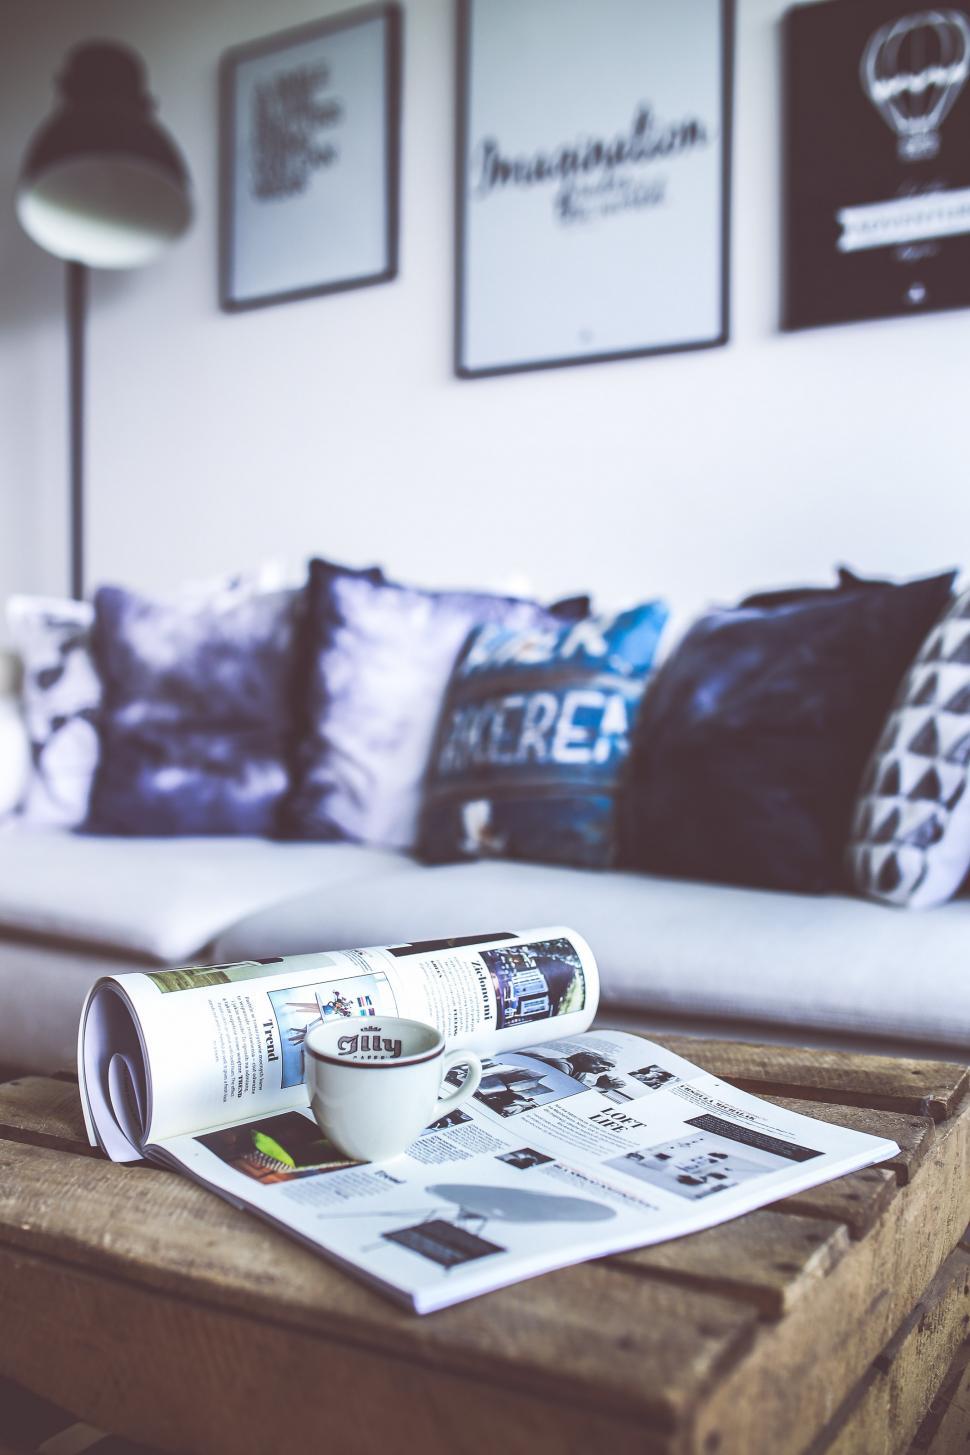 Free Image of Coffee Table With Newspaper 